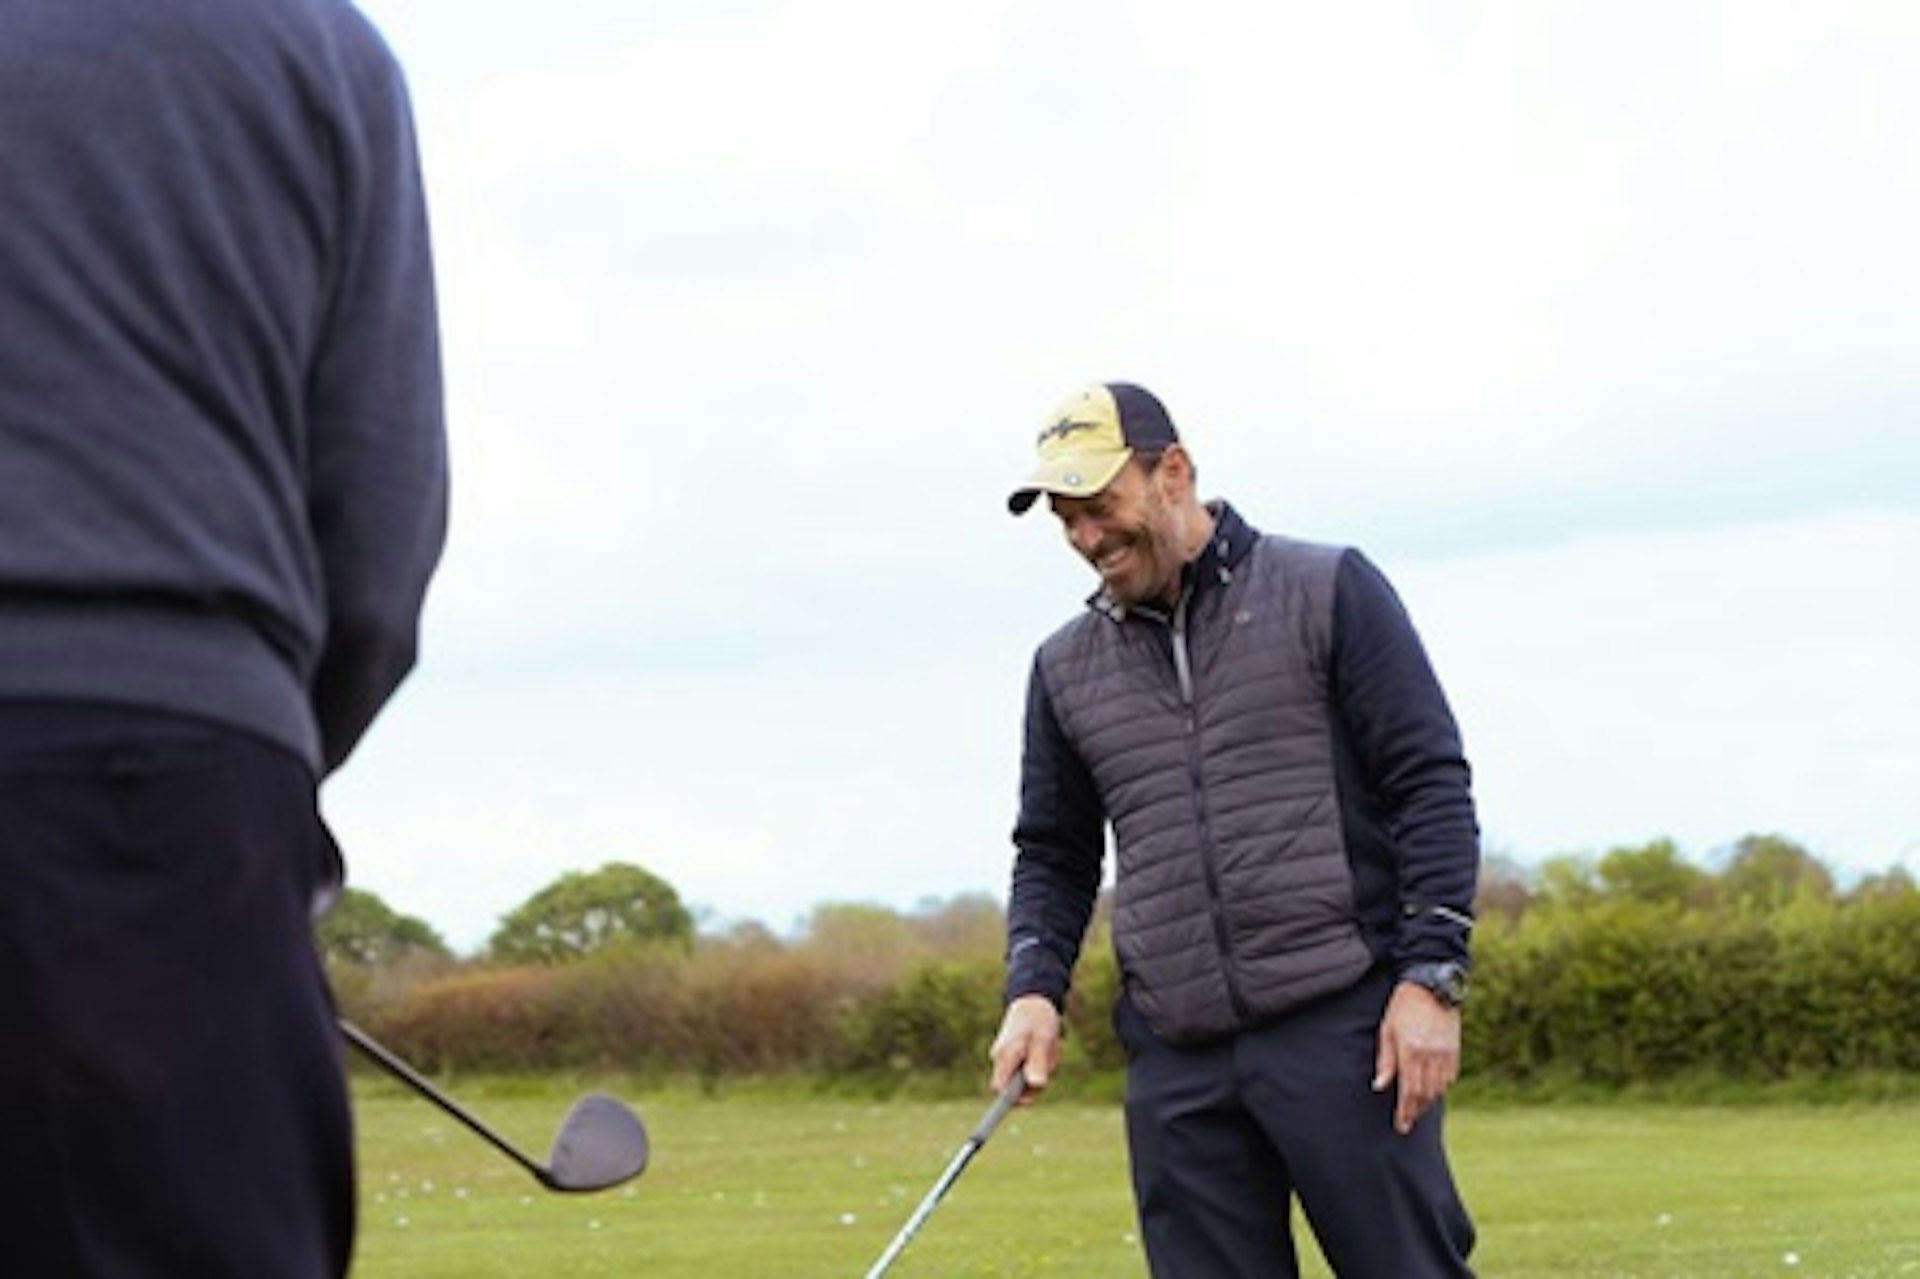 30 minute Golf Lesson with a PGA Professional 3